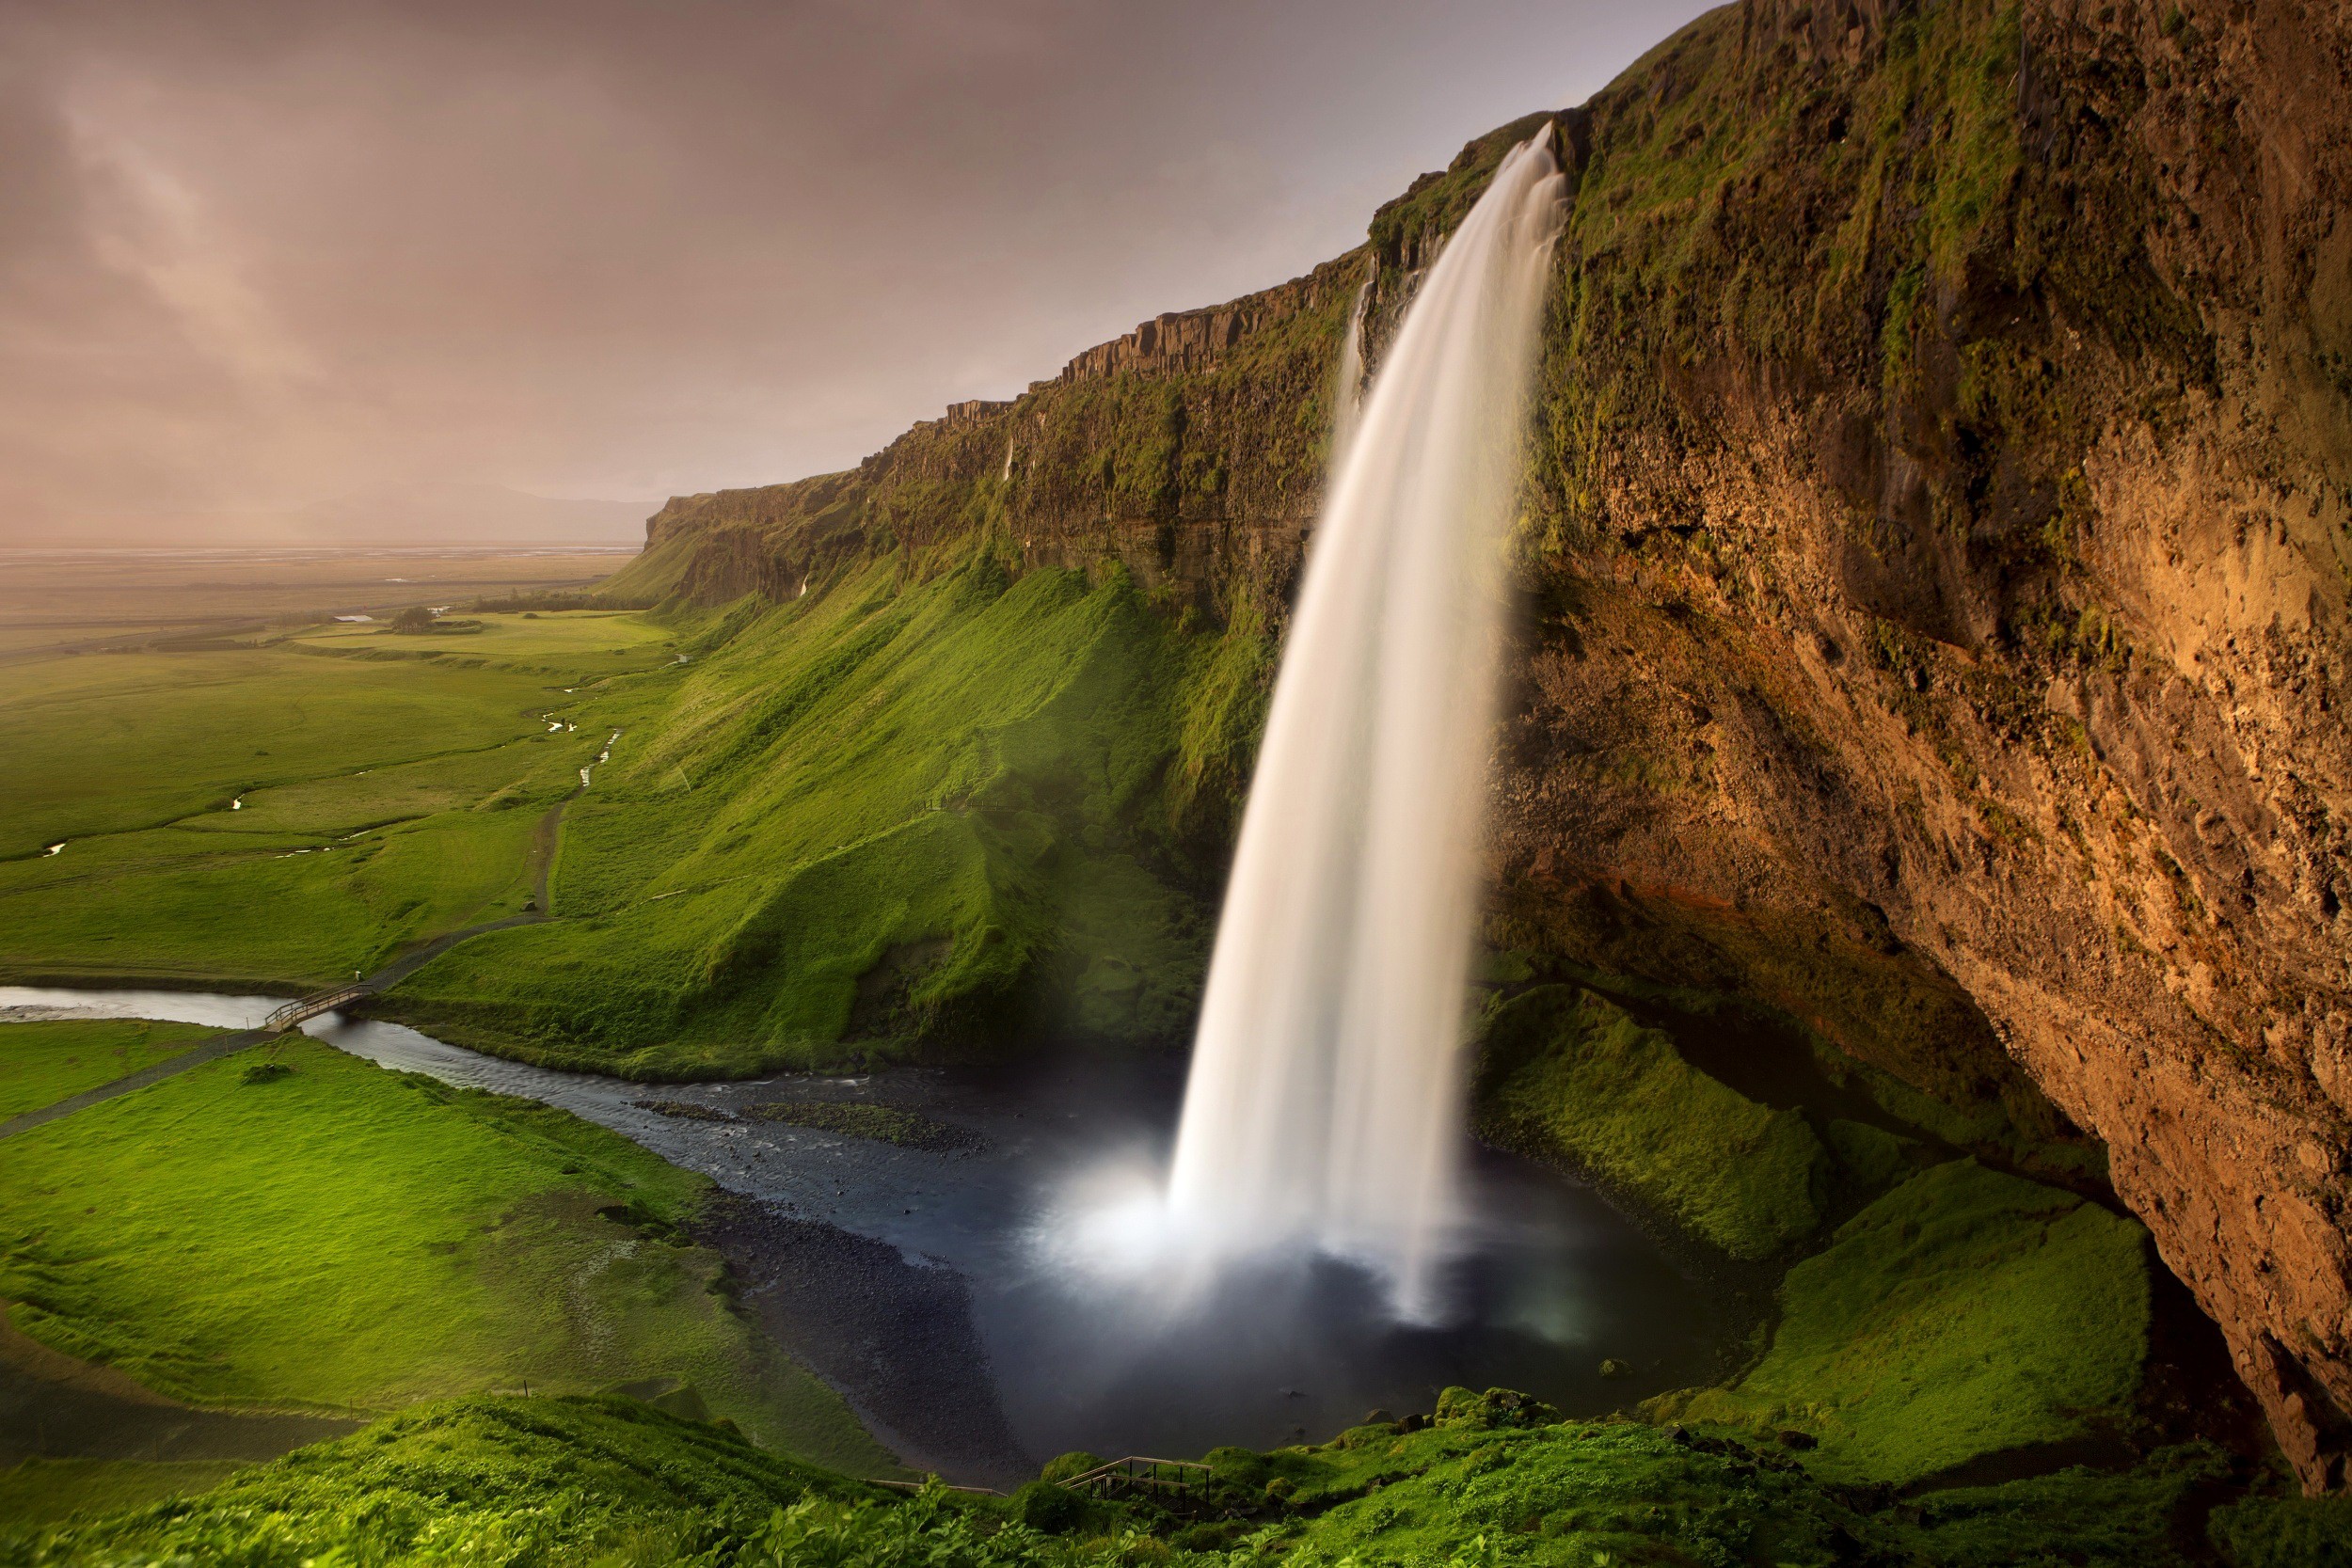 General 2500x1667 waterfall Seljalandsfoss Waterfall Iceland cliff nordic landscapes rocks rock formation nature outdoors water